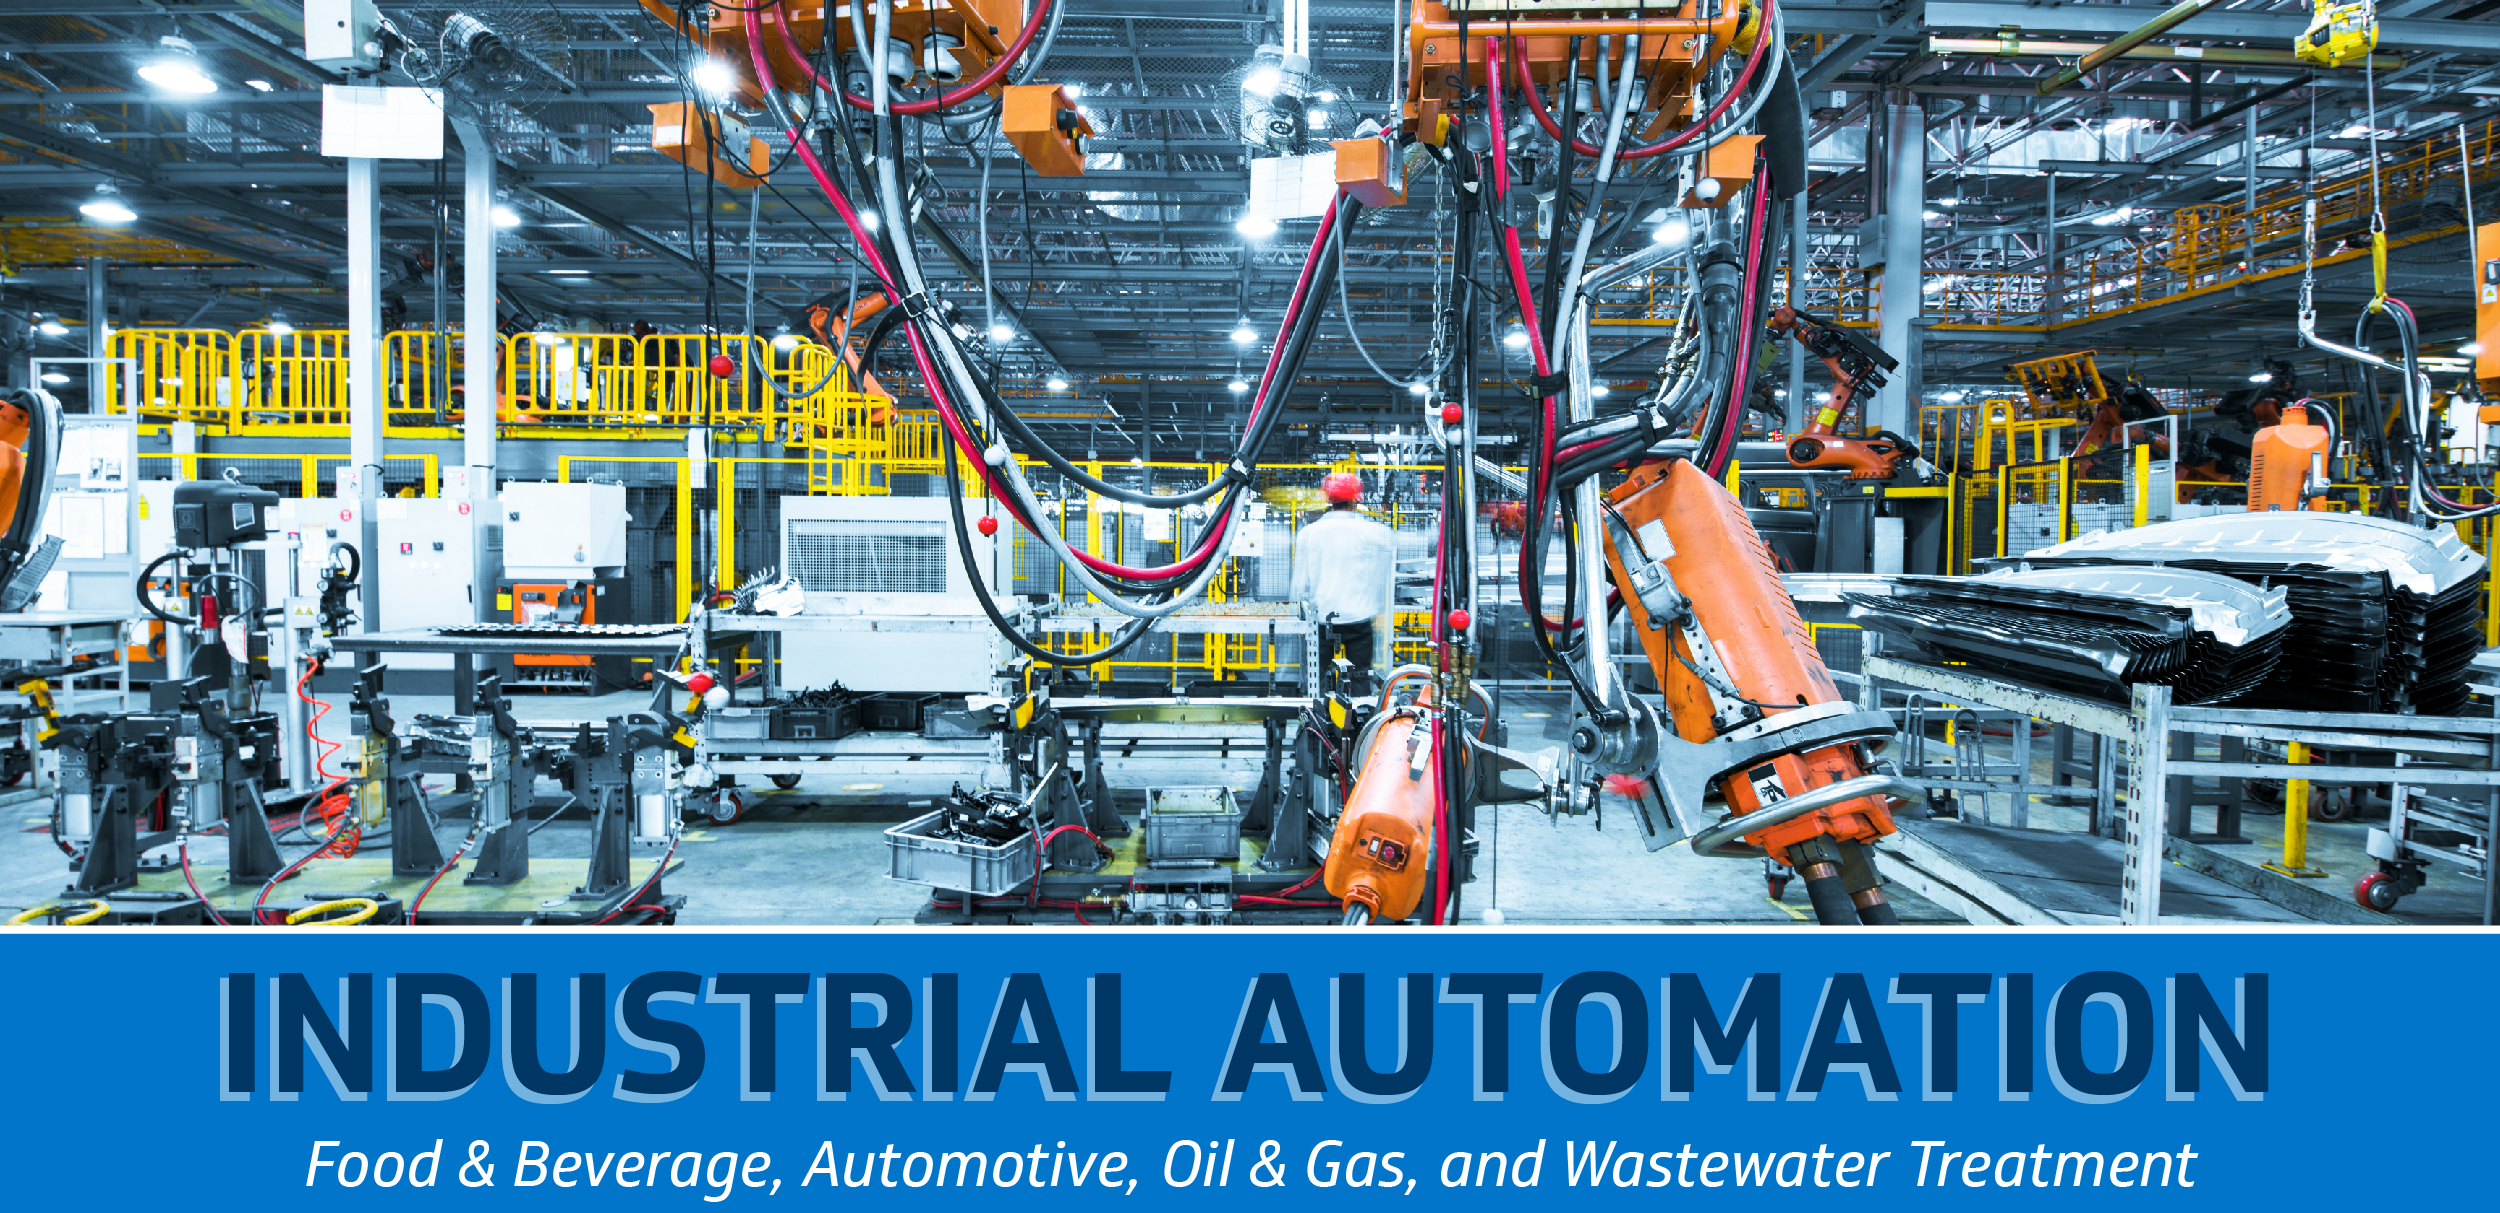 Industrial_Automation_Email_2_Header_01